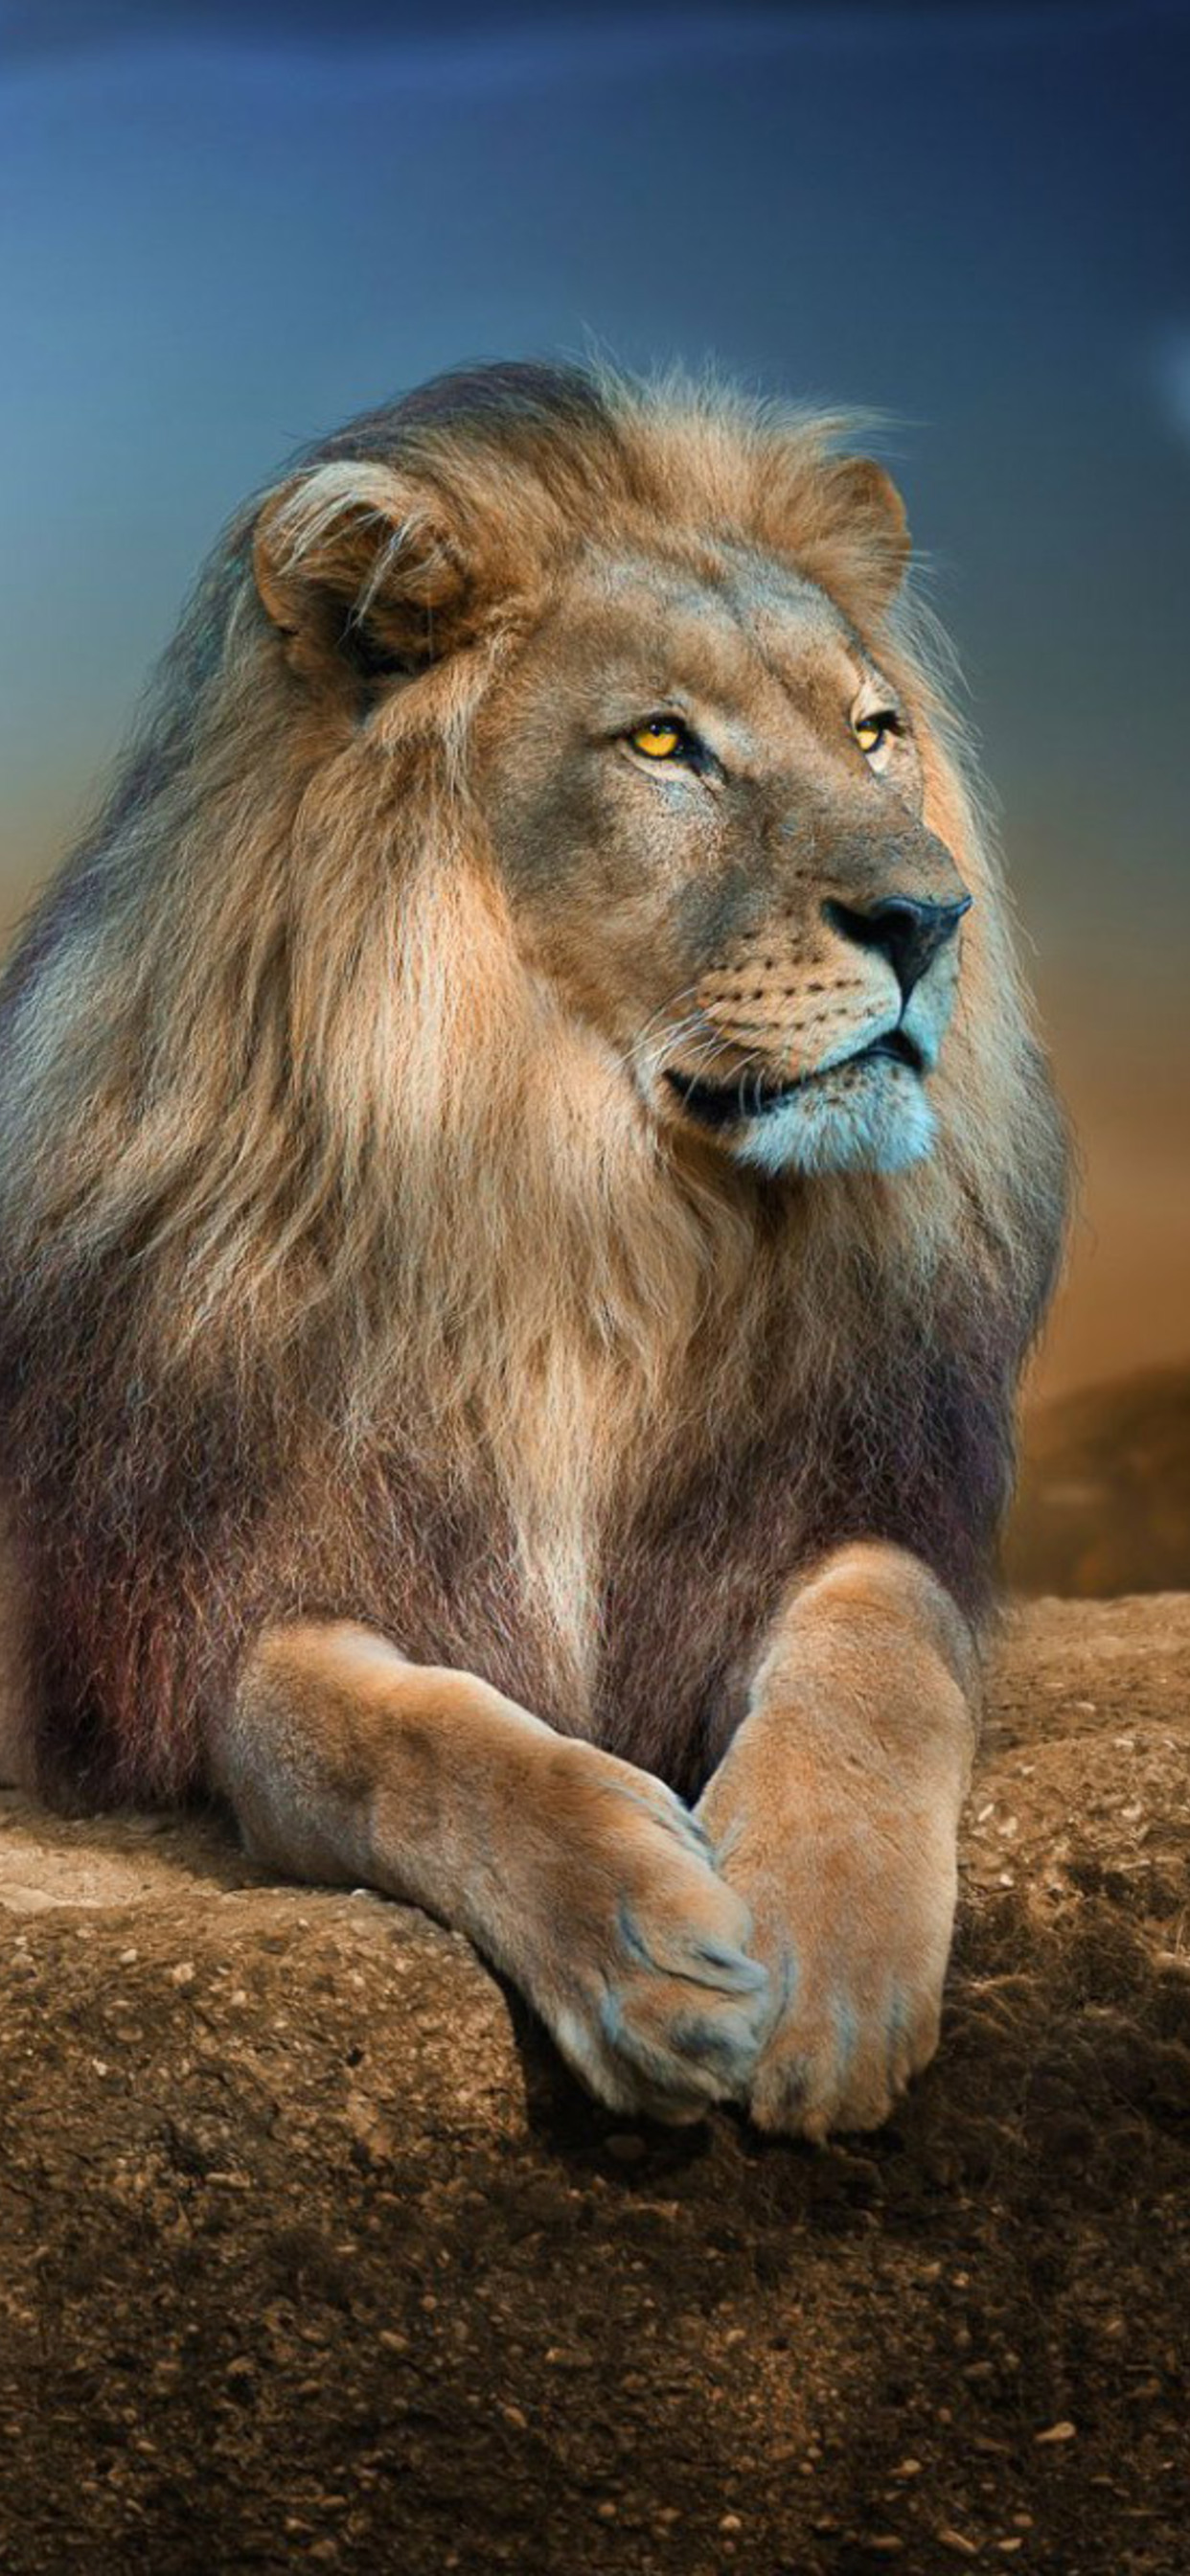 Lion Background Iphone